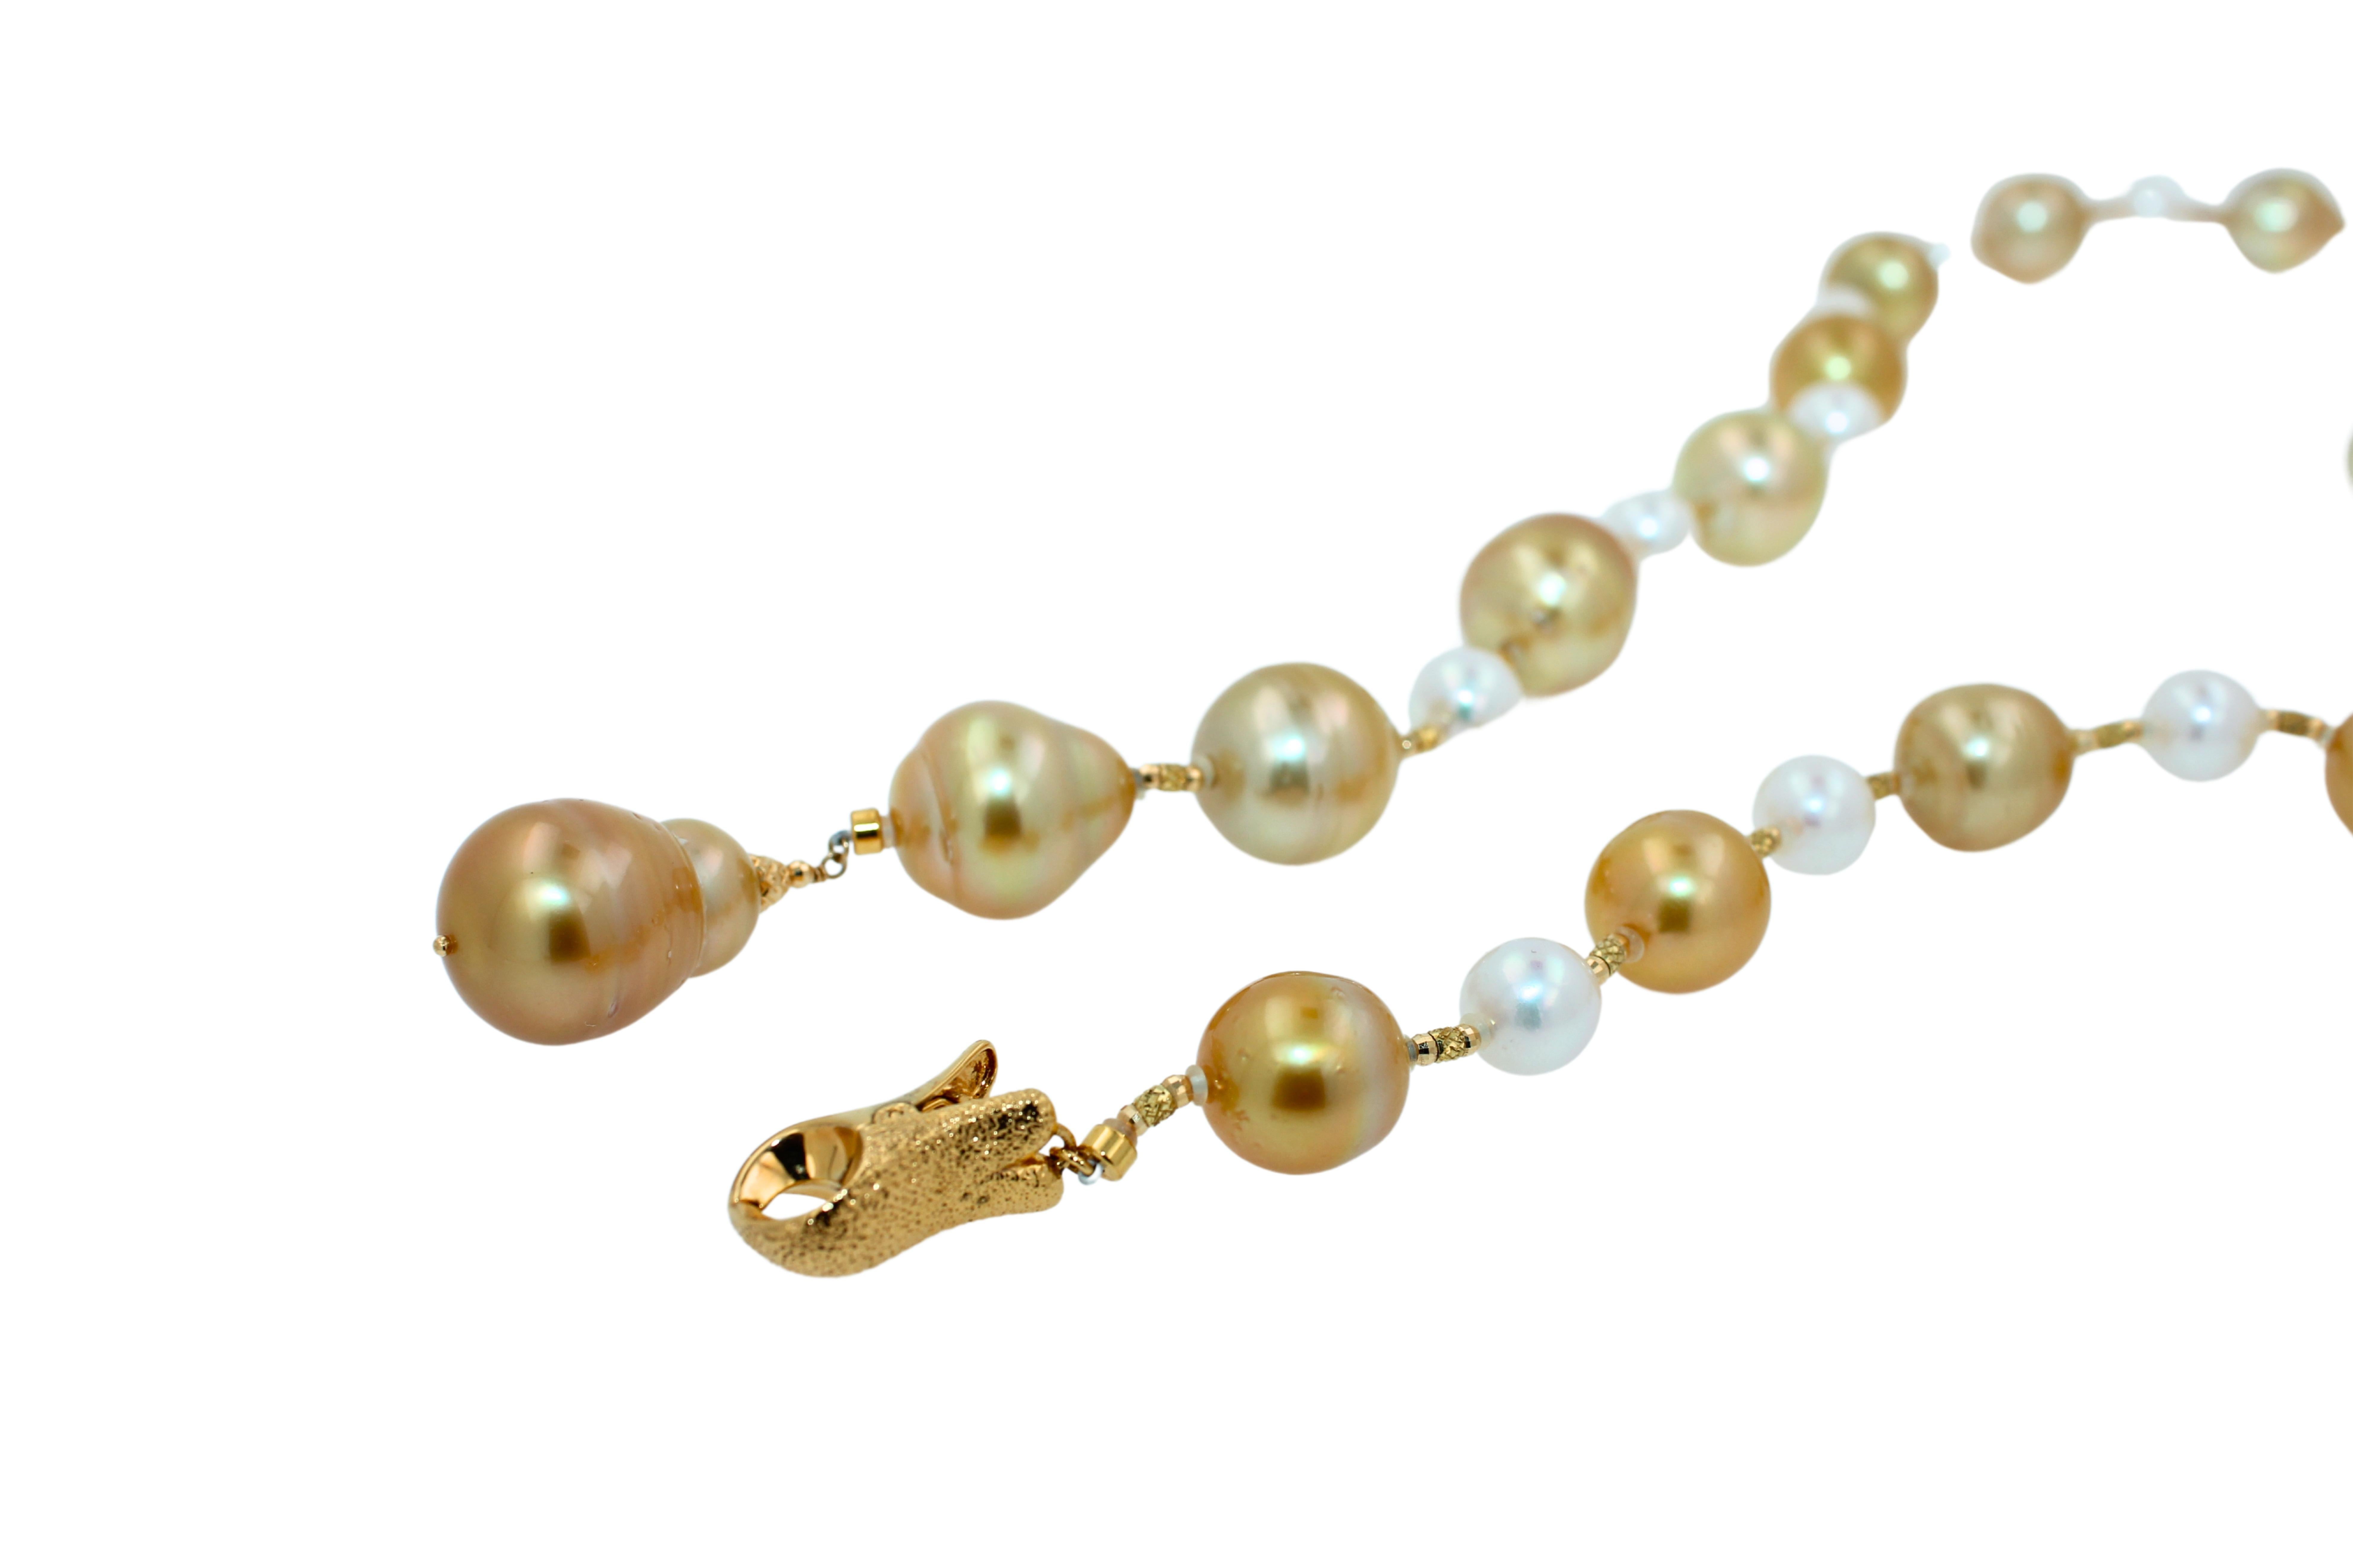 Yellow Golden White South Sea Pearls 18K Gold Adjustable Lariat Clasp Necklace For Sale 2